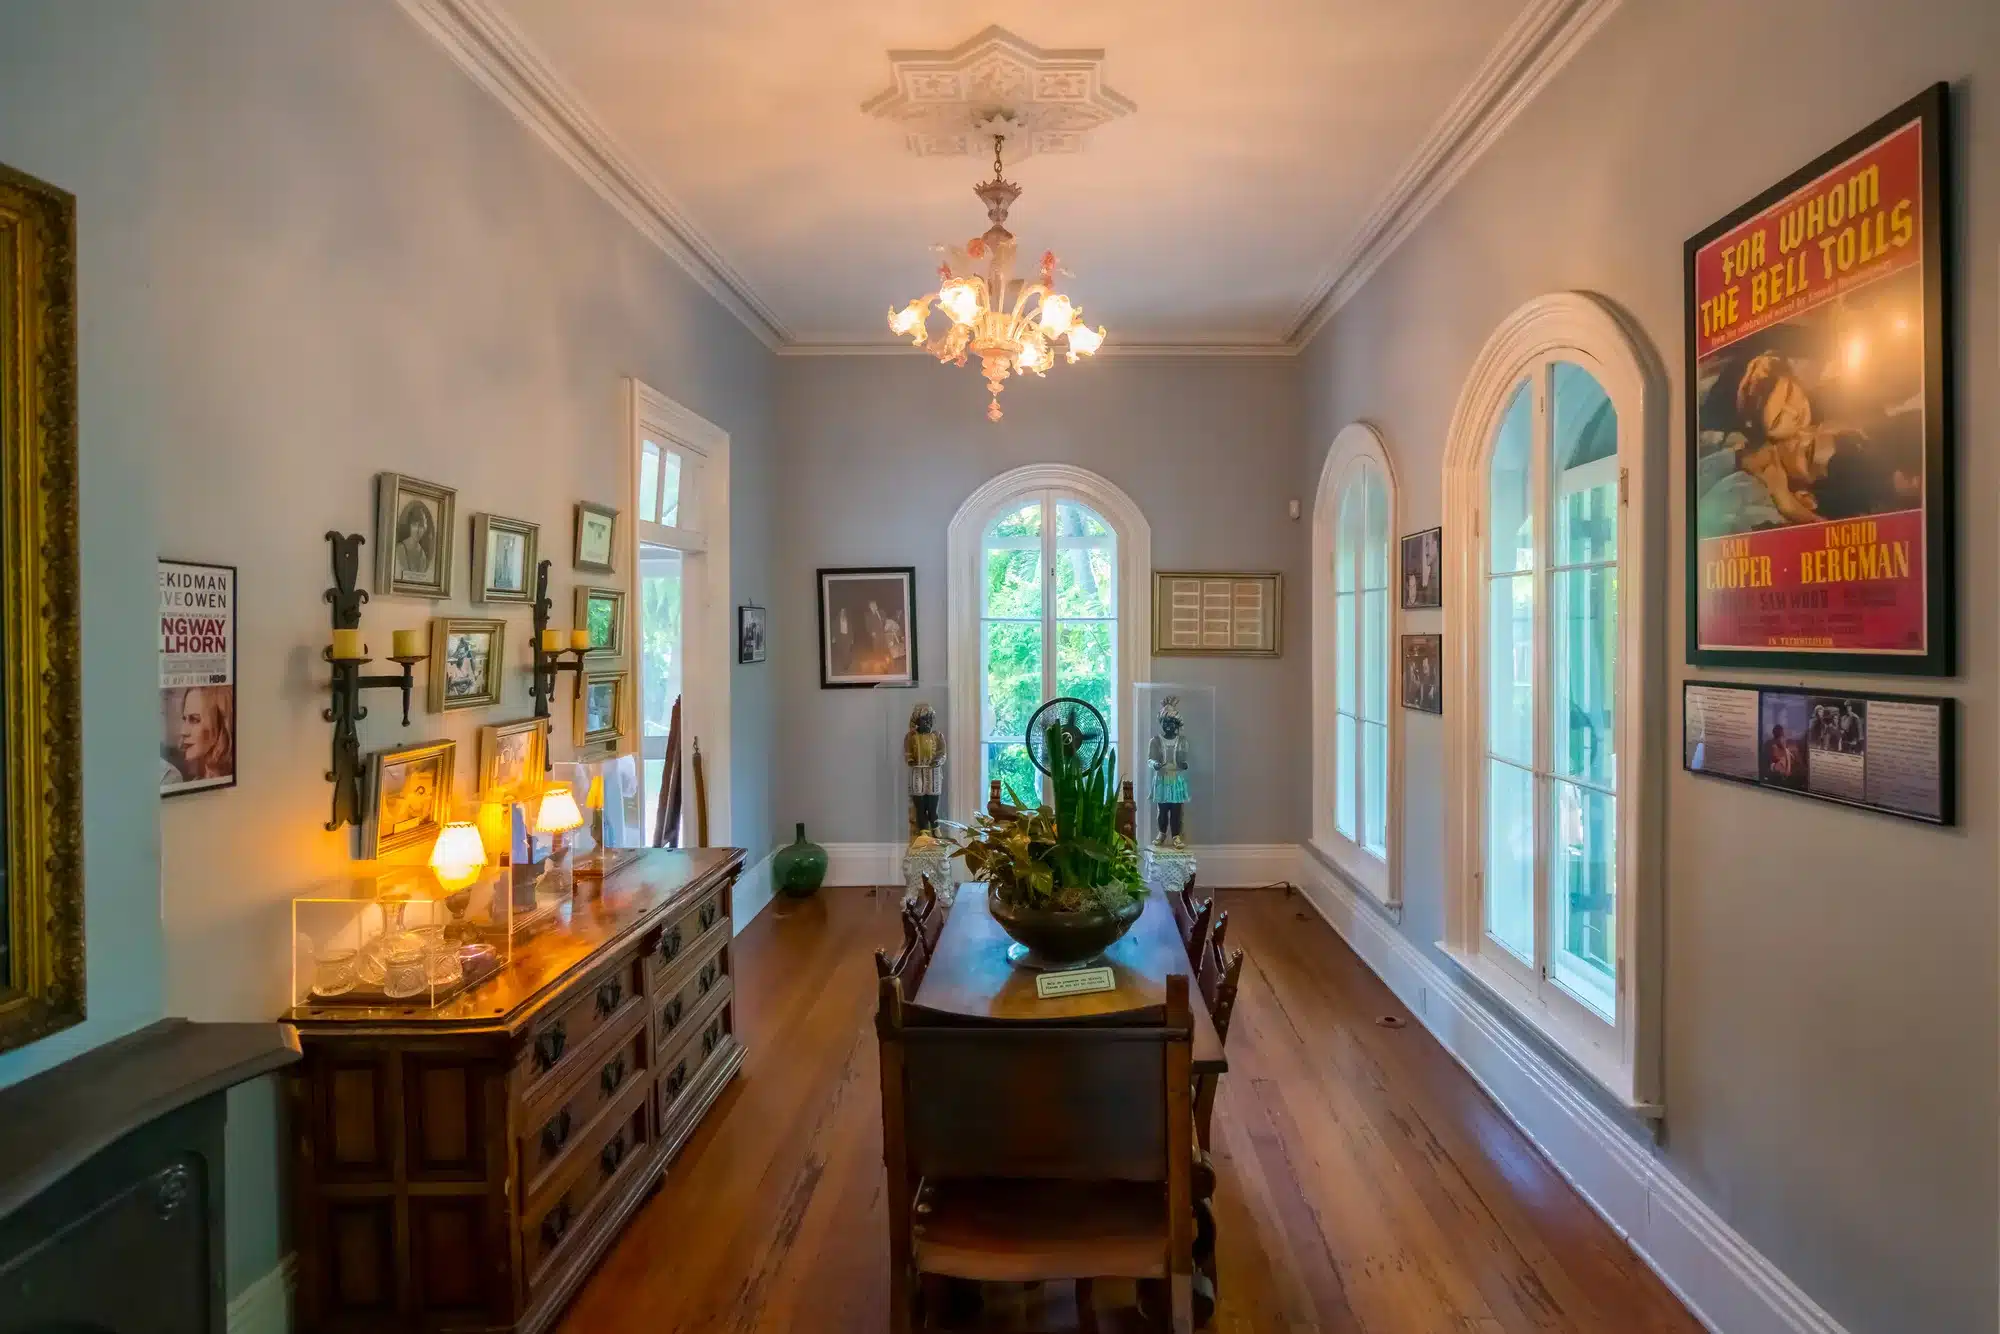 Key West, Florida, Interior of Ernest Hemingway home. Luxurious villa in Spanish colonial style. Dining room with old Spanish wooden furniture and big windows. Luxury vintage home.